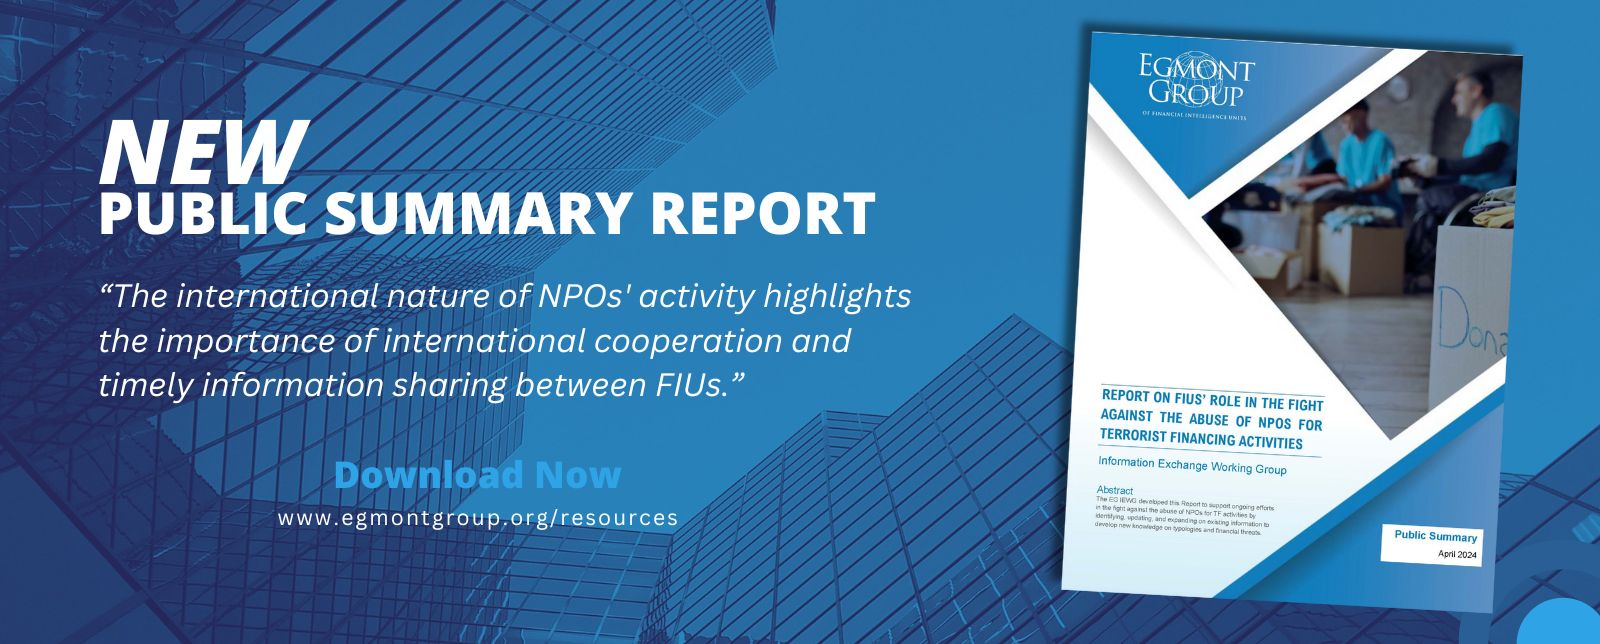 FIUs Role in the Fight Against the Abuse of NPOs for TF Activities Public Summary Report